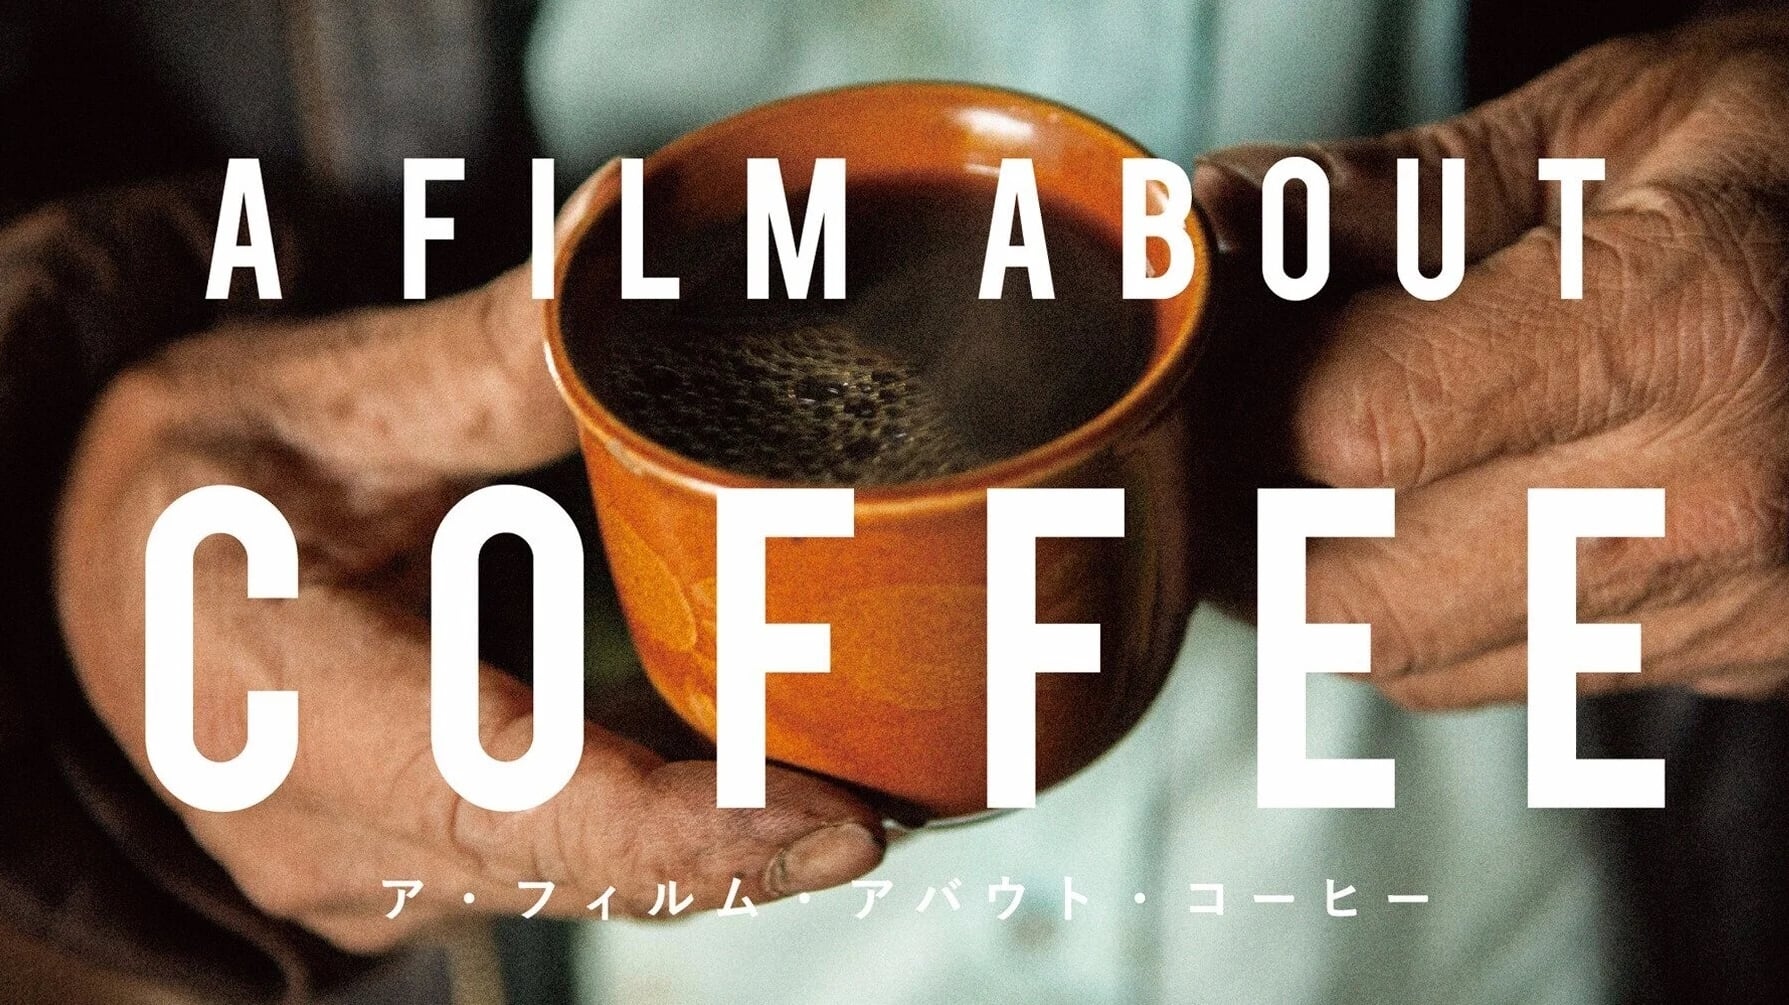 A Film About Coffee 2014 123movies